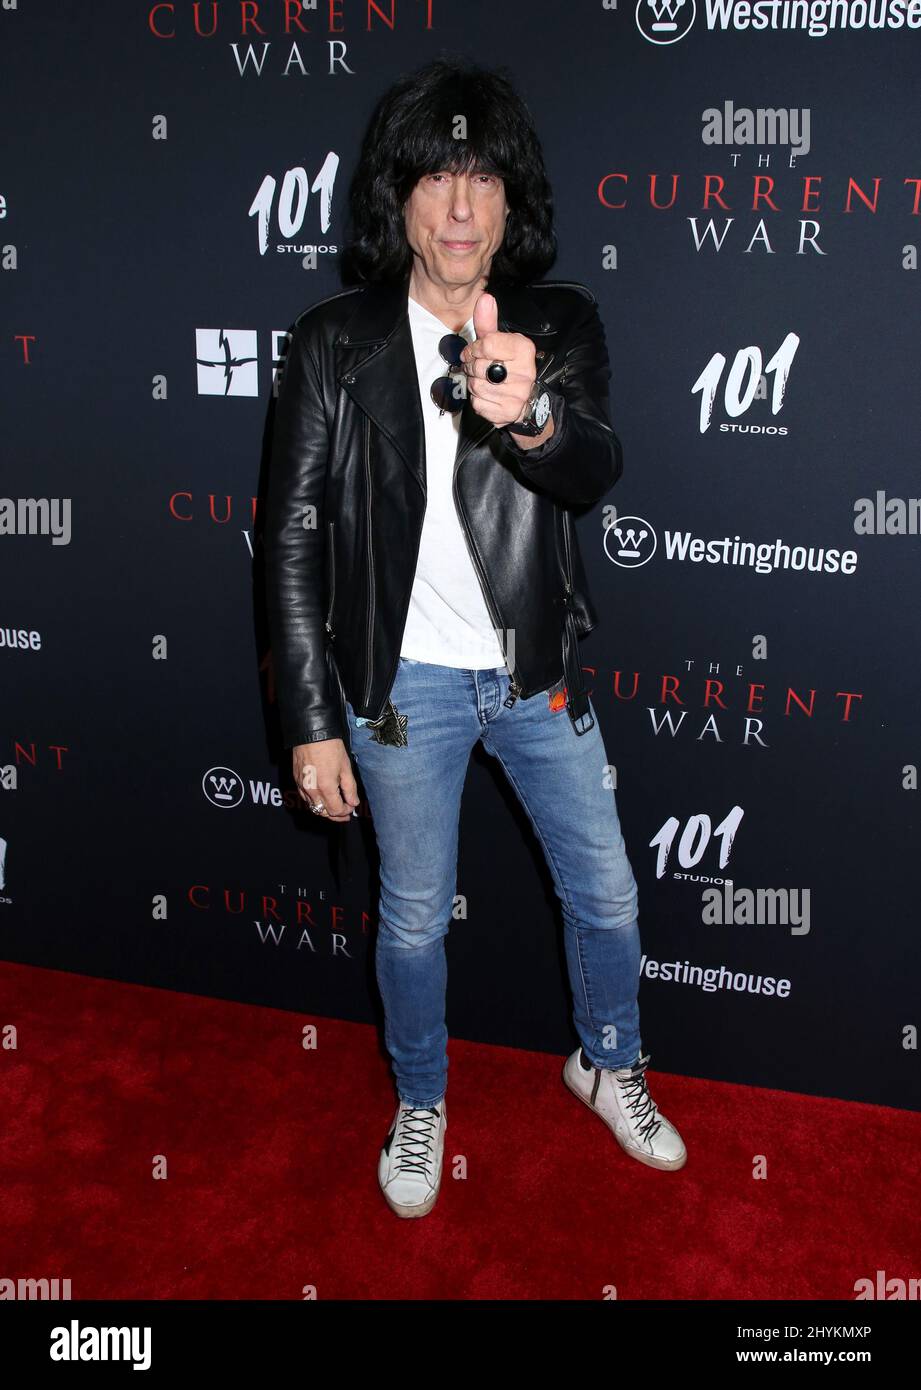 Marky Ramone attending 'The Current War' New York Premiere at the AMC Lincoln Square on October 21, 2019 in New York City, NY Stock Photo